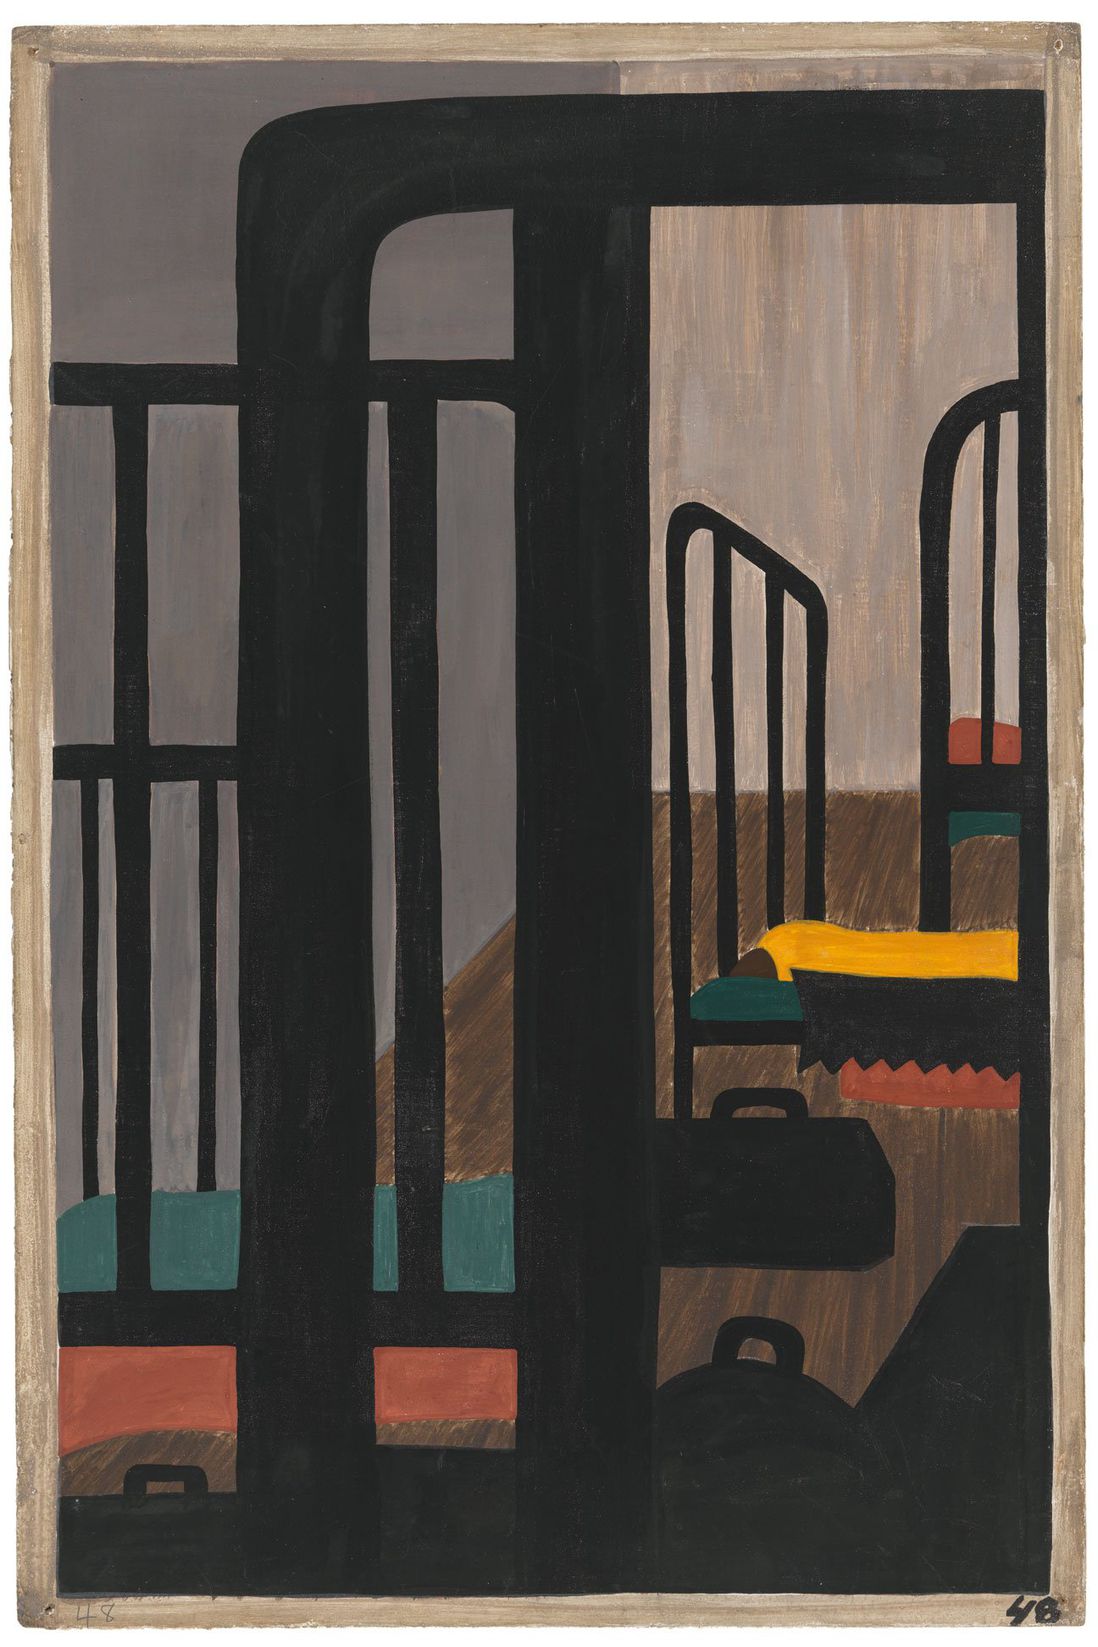 Jacob Lawrence. The Migration Series. 1940-41. Panel 48: "Housing for the Negroes was a very difficult problem." (The Jacob and Gwendolyn Knight Lawrence Foundation, Seattle / Artists Rights Society (ARS), New York)